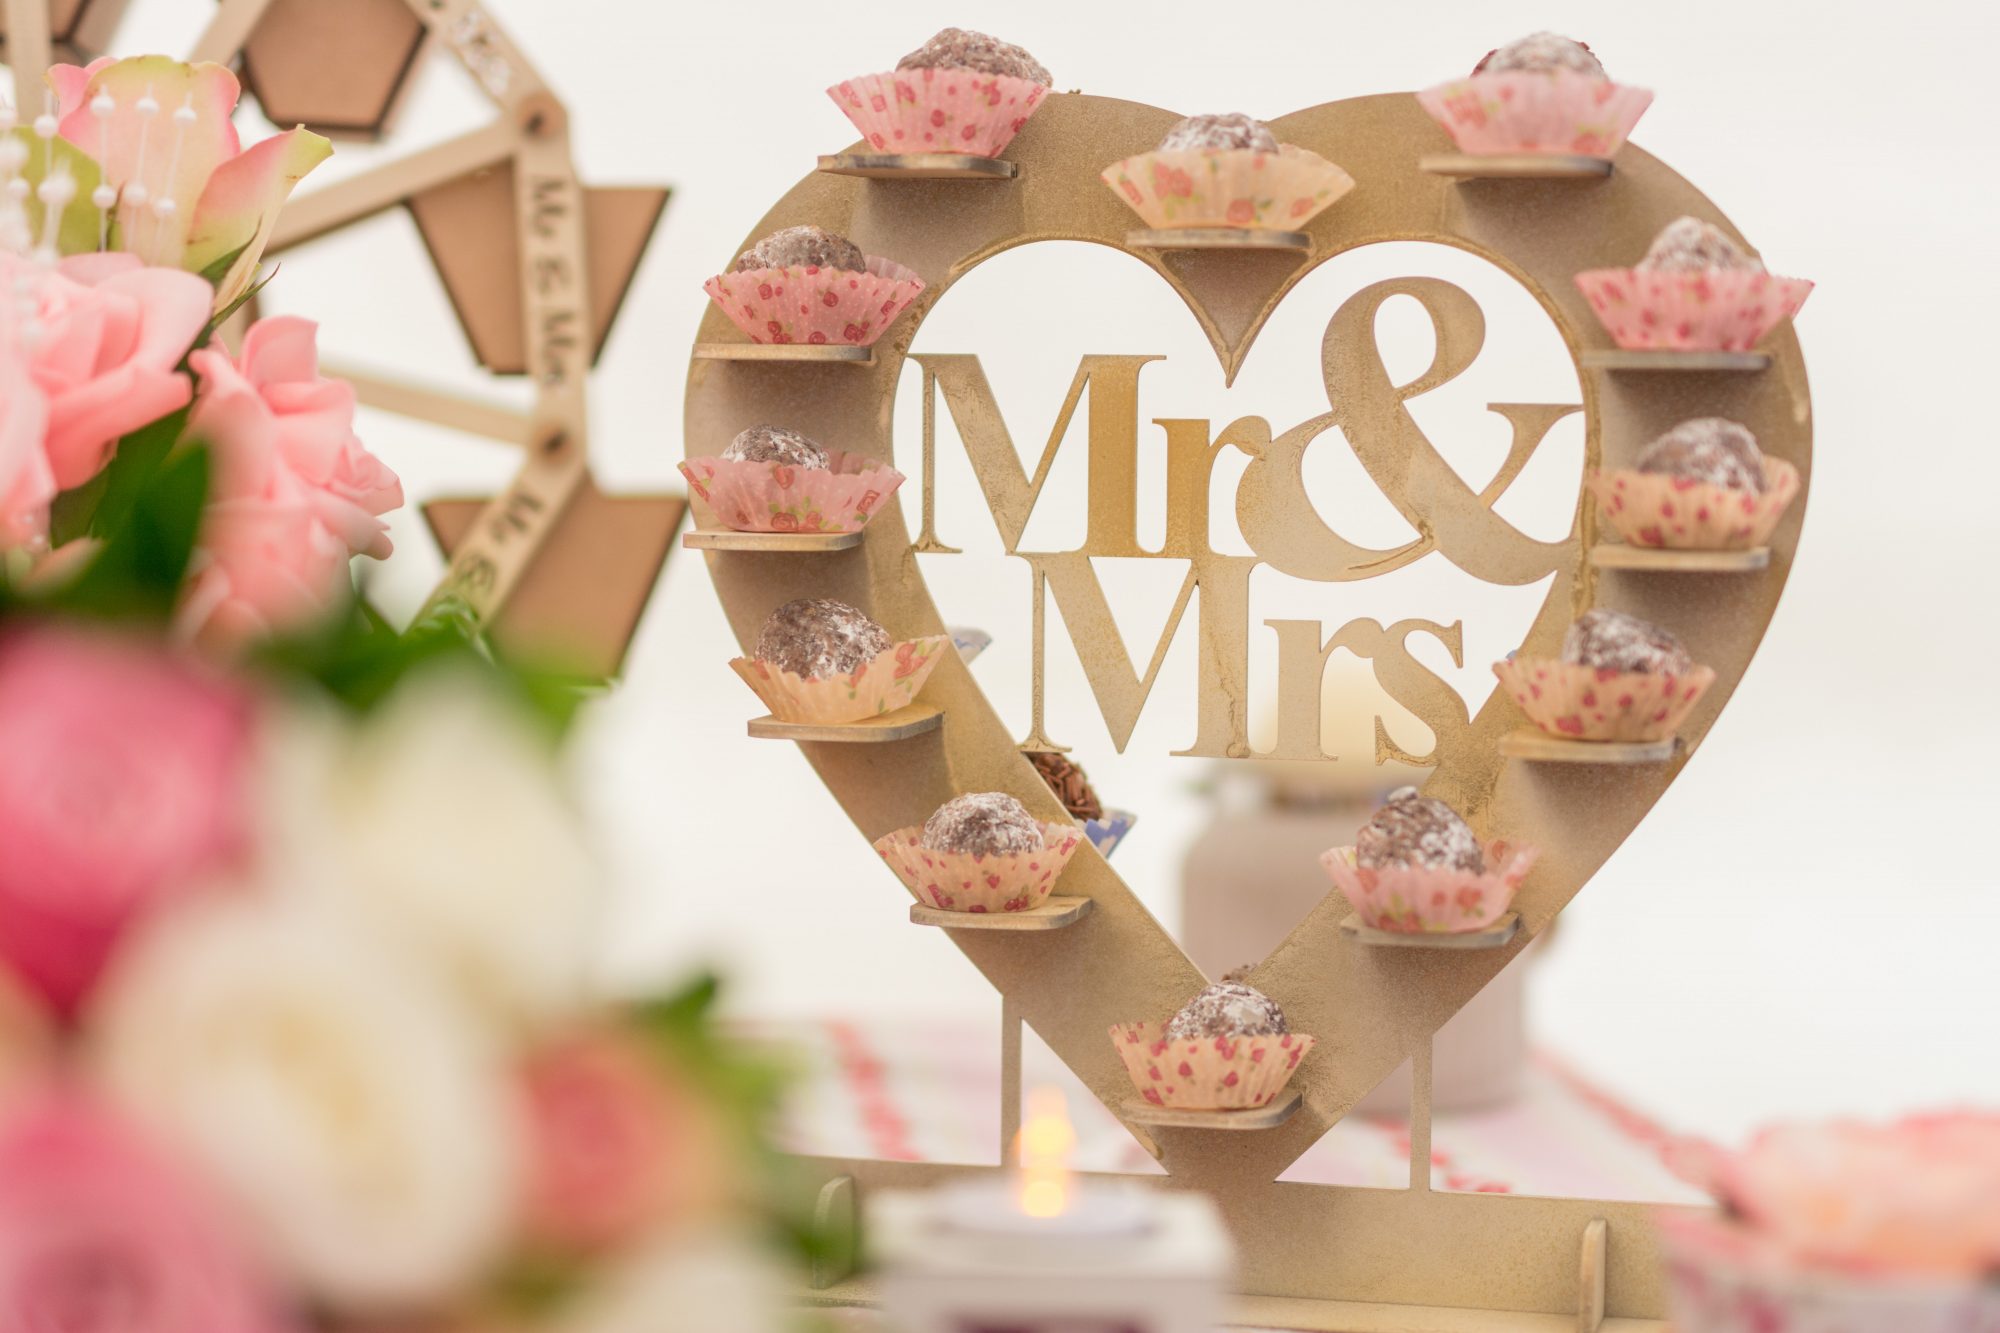 Mr and Mrs wedding reception cake stand photo